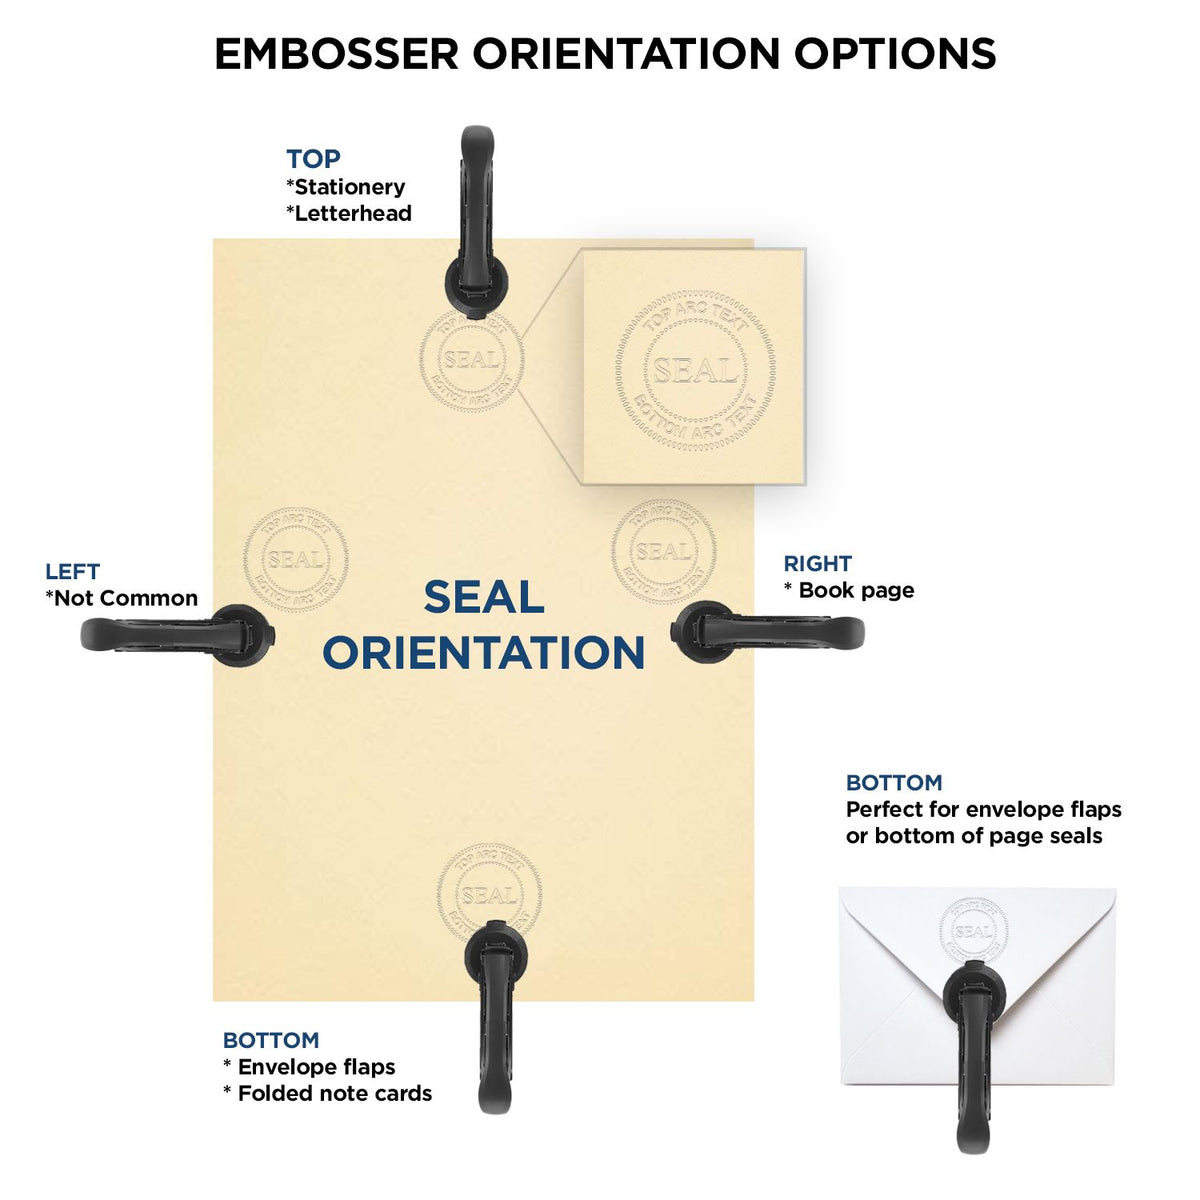 An infographic for the State of Alabama Extended Long Reach Engineer Seal showing embosser orientation, this is showing examples of a top, bottom, right and left insert.